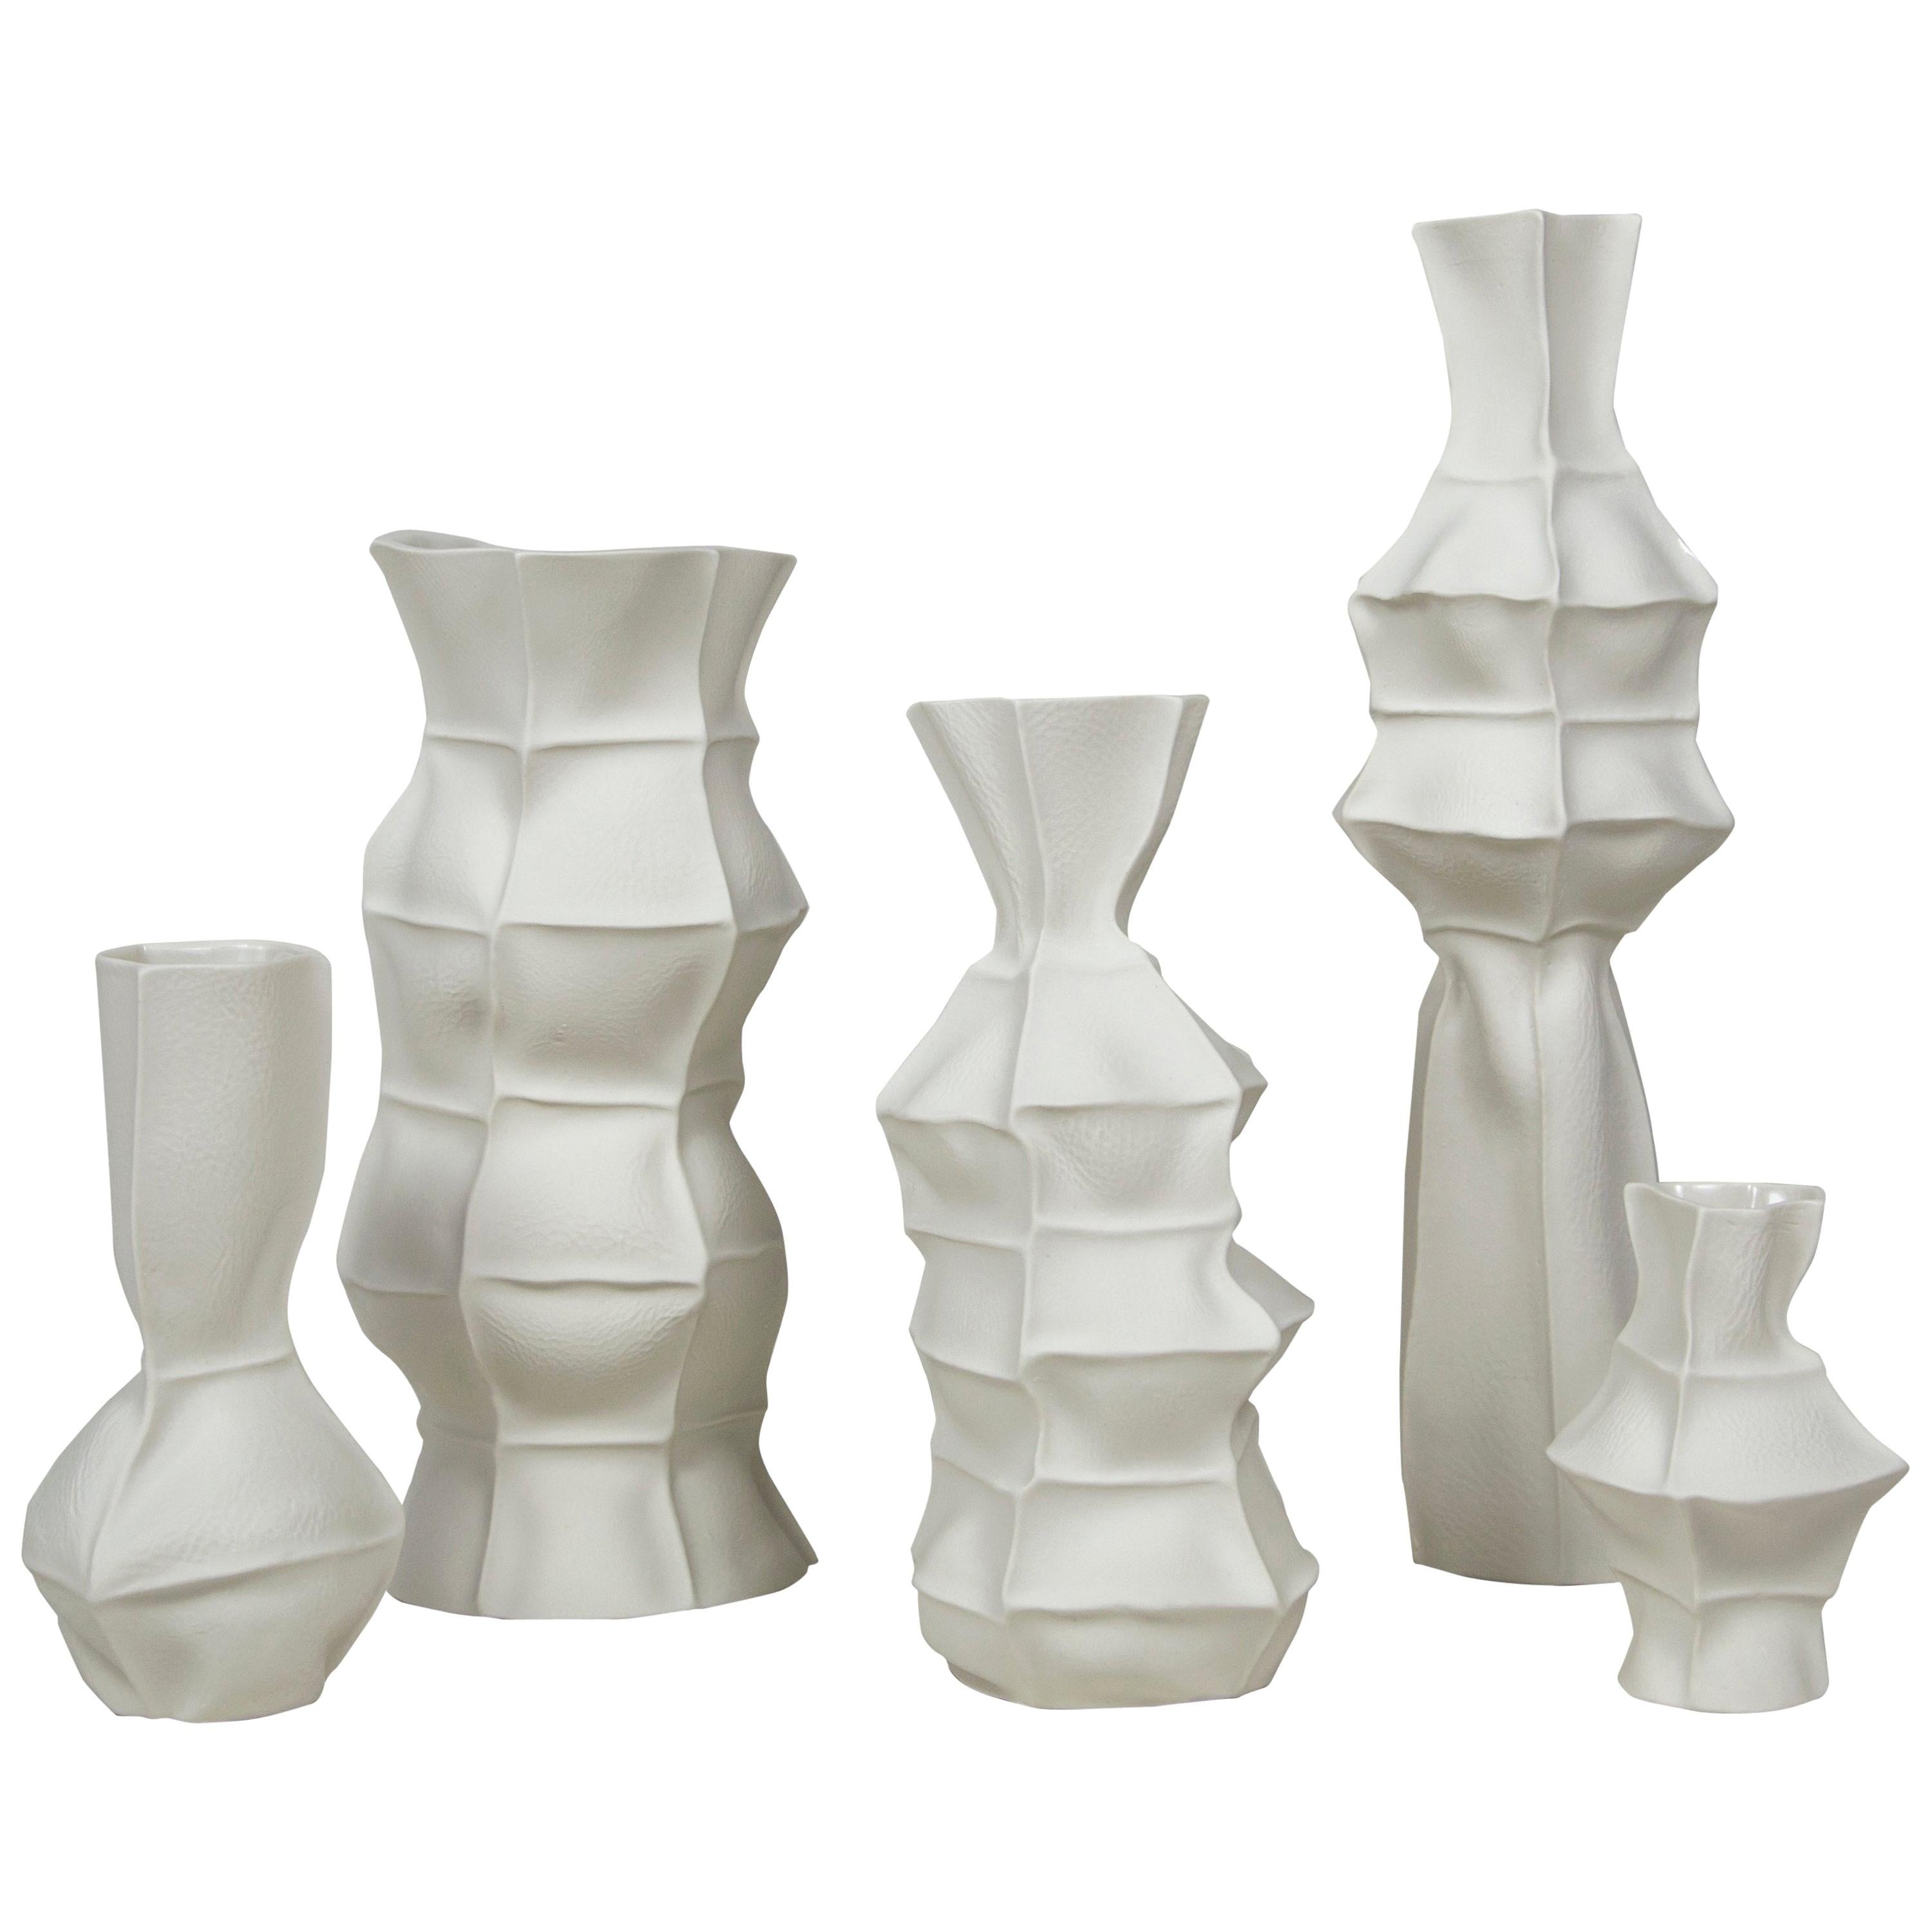 Set of Five Kawa Vases by Luft Tanaka, in Stock